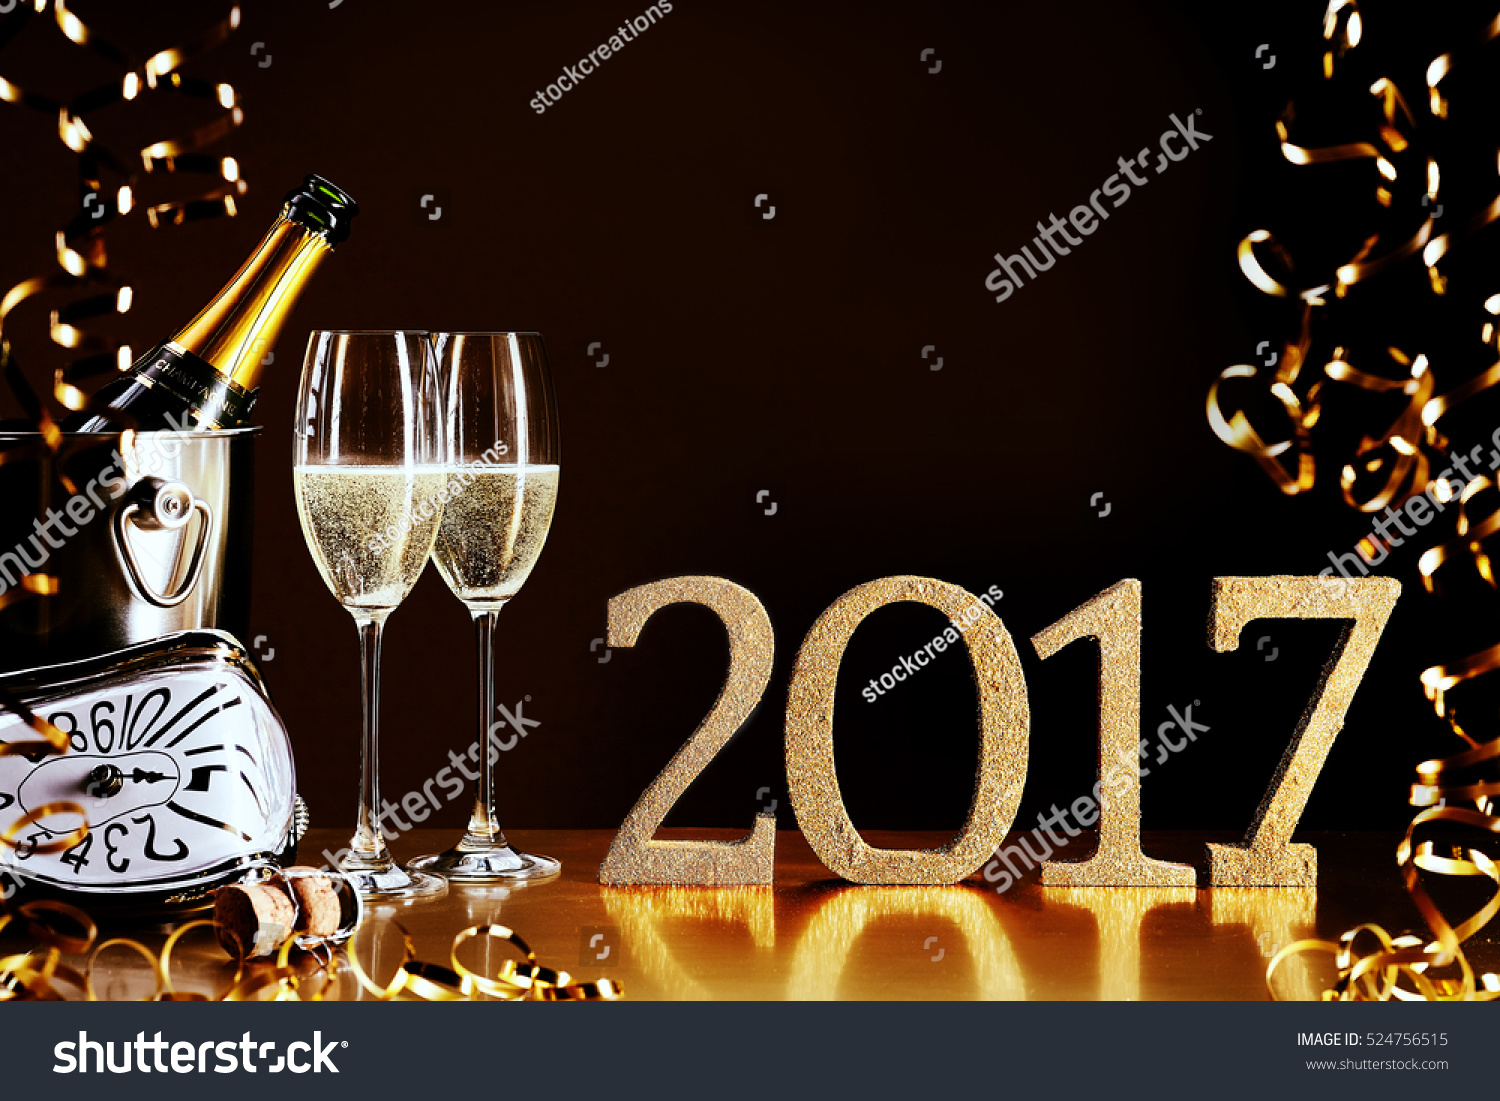 2017 New Year celebration with a bottle and flutes of chilled champagne, golden party streamers and a modern clock counting down to midnight, copy space for your greeting #524756515